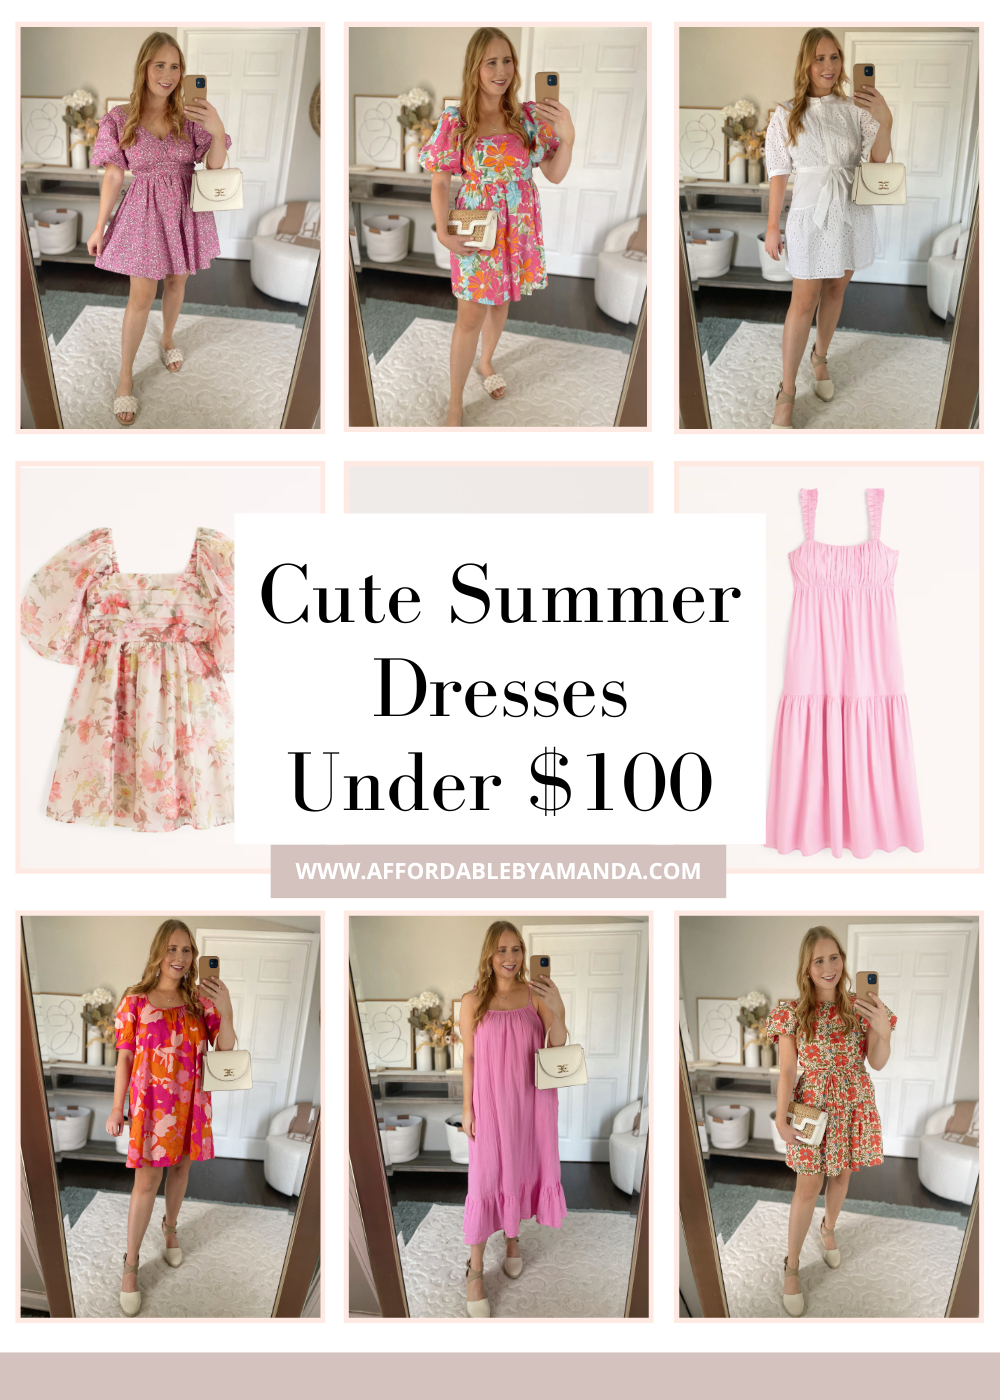 Summer Work Wear Must Haves 2023 - Affordable by Amanda